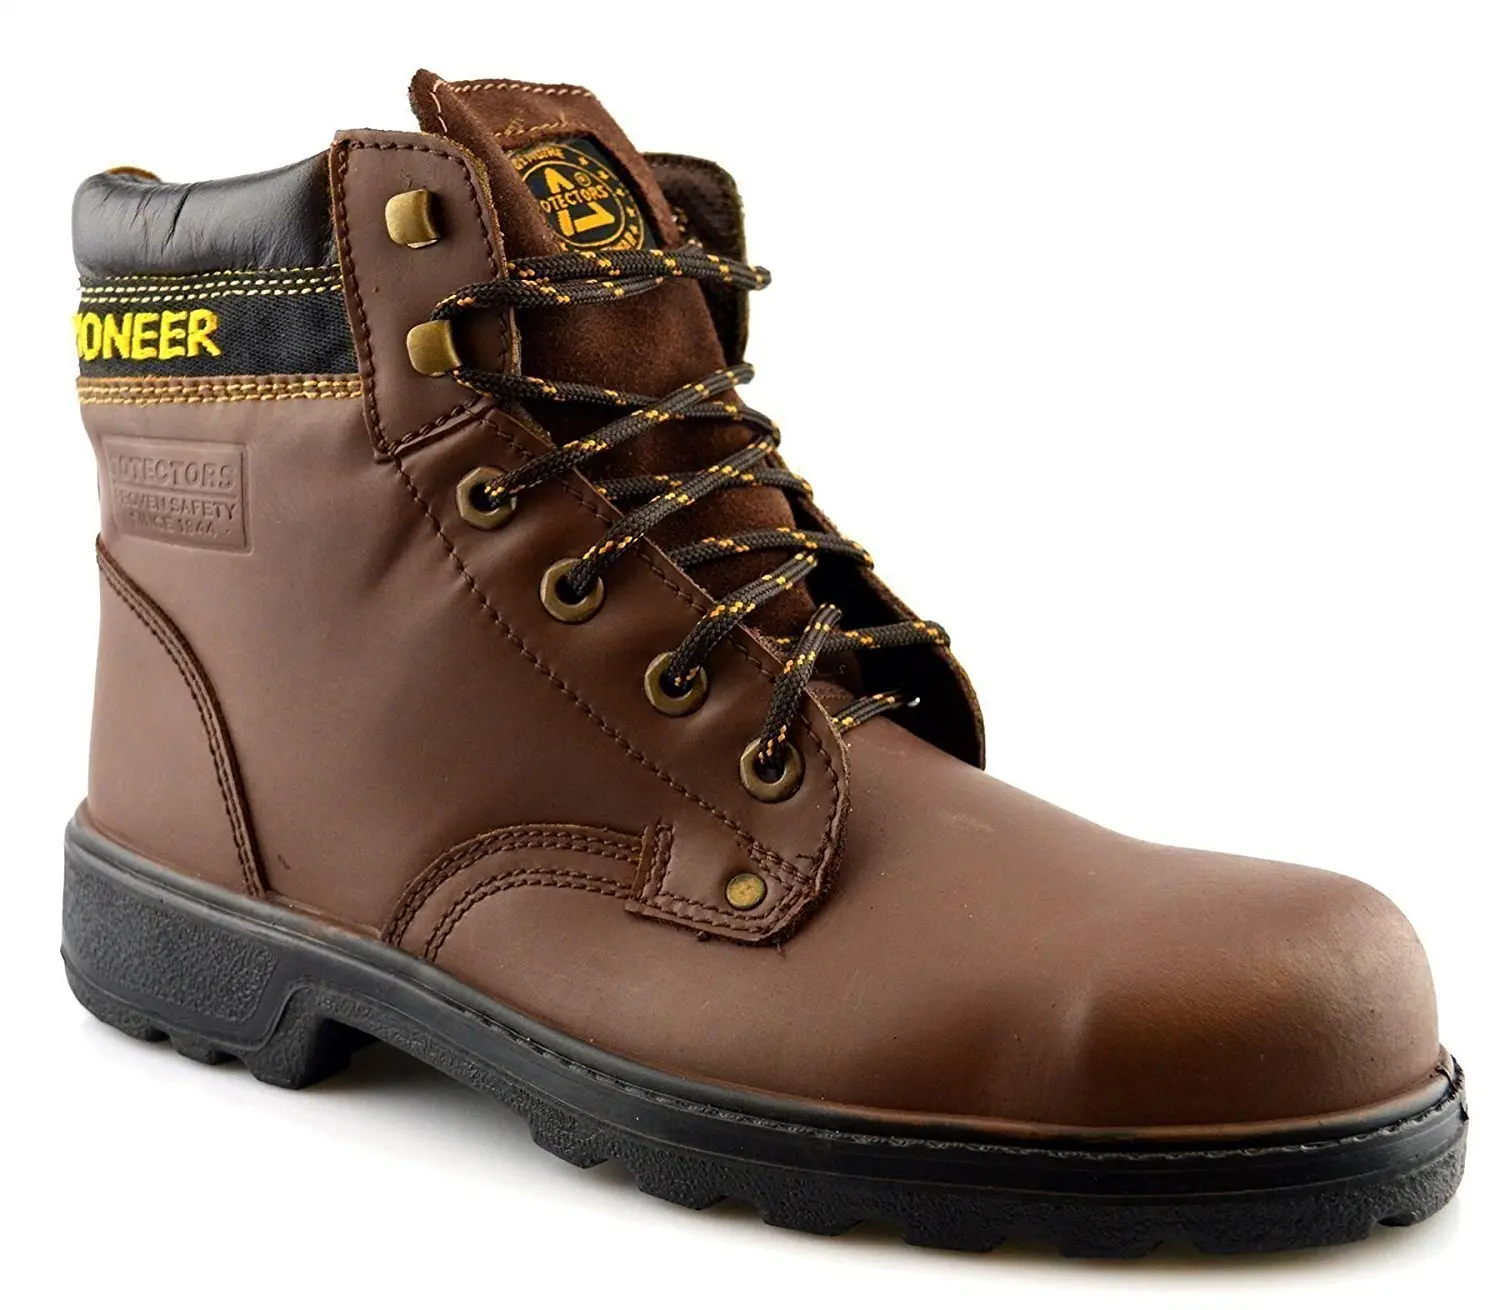 totectors safety boots